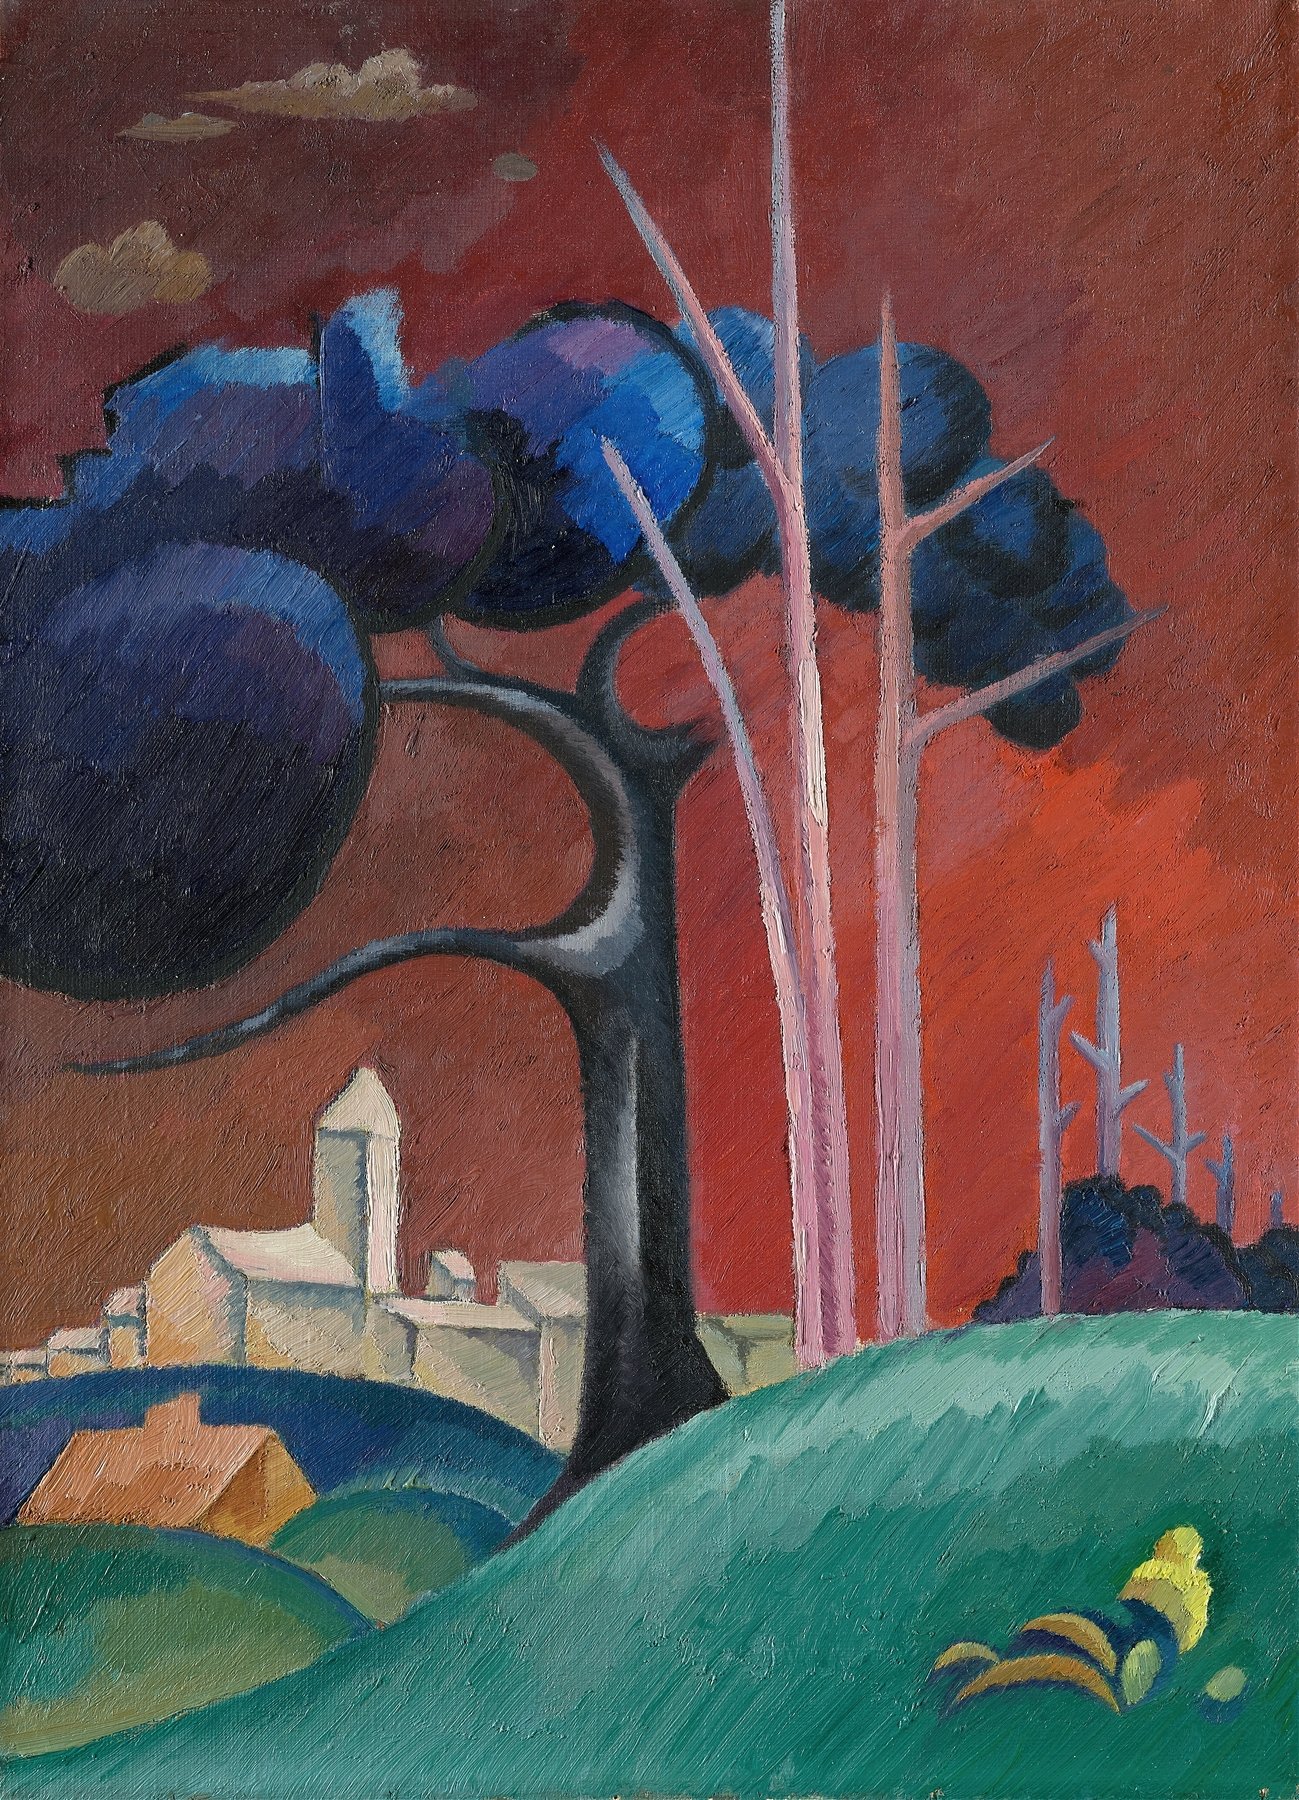 Landscape with Factory by Lake, II